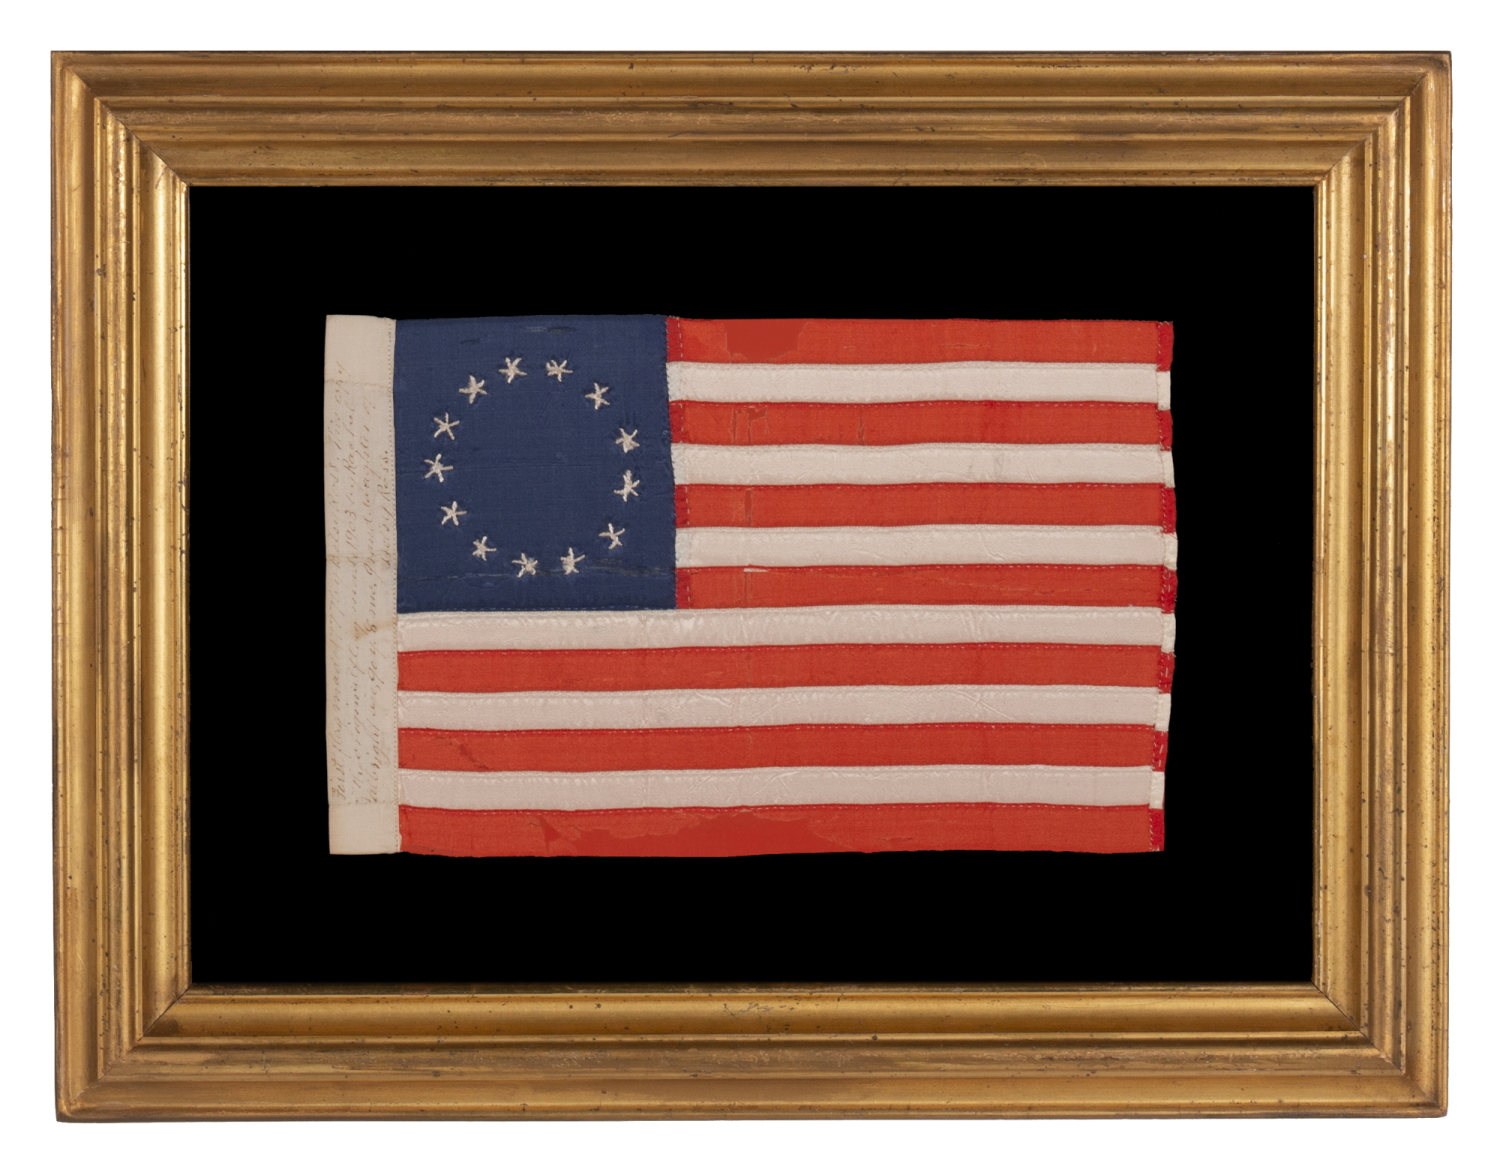 13 HAND-EMBROIDERED STARS AND EXPERTLY HAND-SEWN STRIPES ON AN ANTIQUE AMERICAN FLAG MADE IN PHILADELPHIA BY RACHEL ALBRIGHT, GRANDDAUGHTER OF BETSY ROSS, SIGNED & DATED 1903